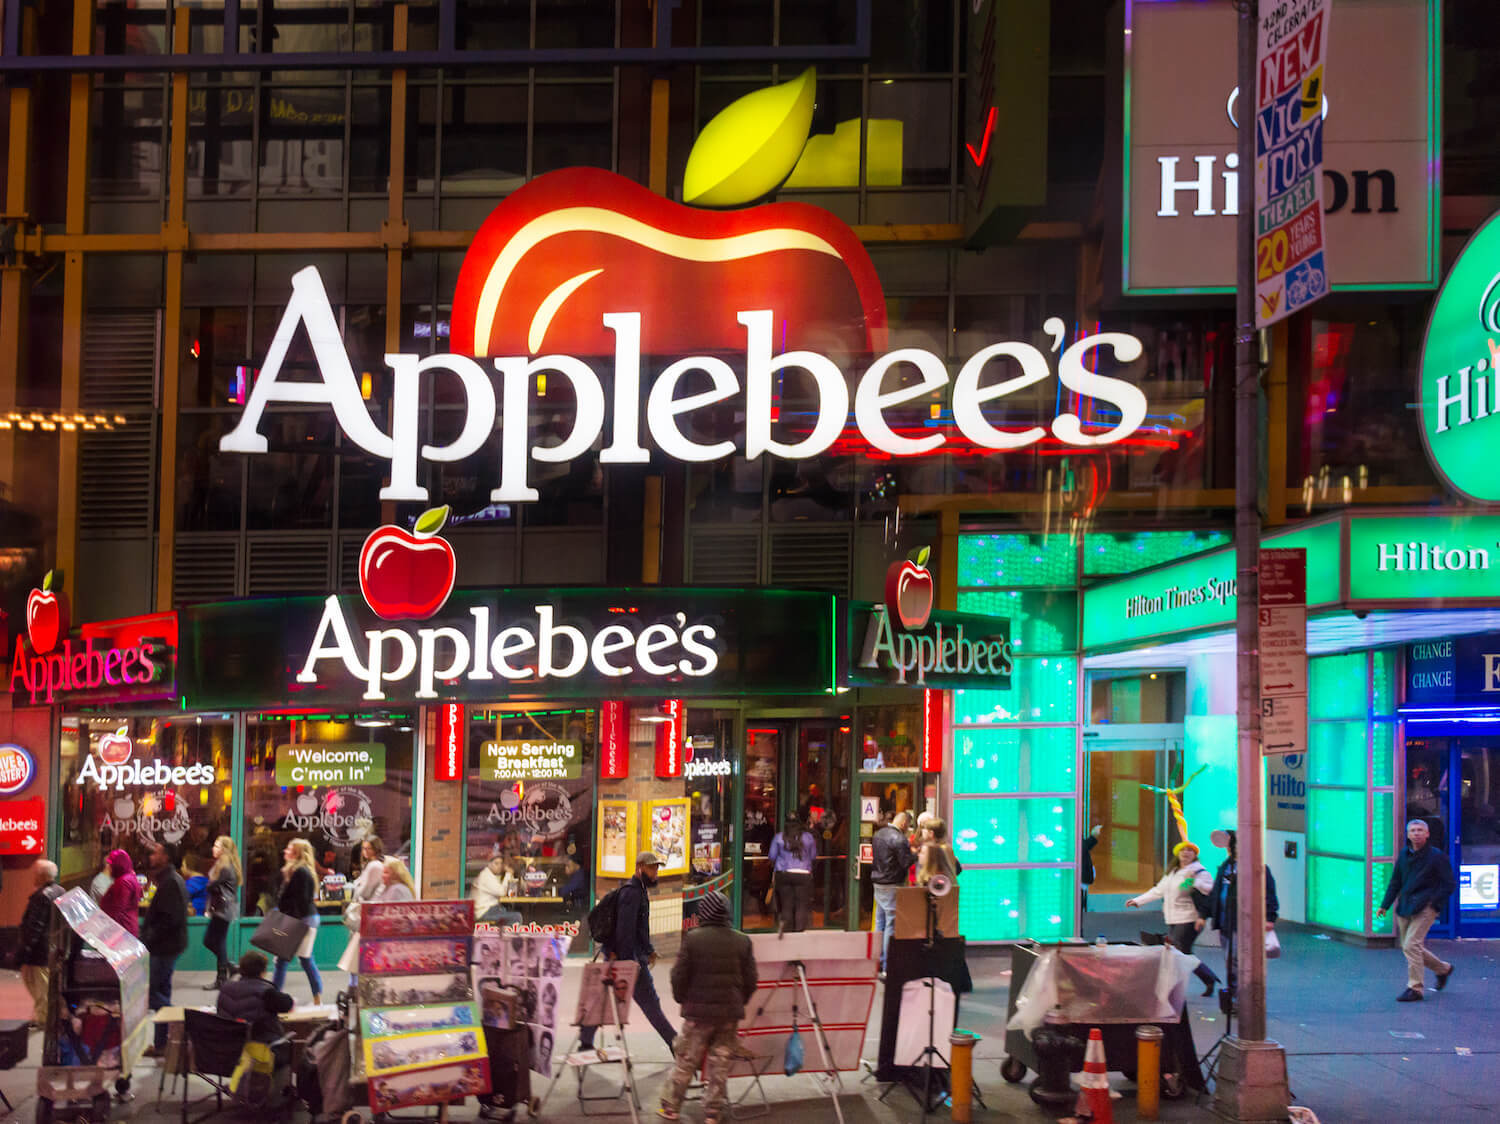 Applebee's restaurant at Times Square in New York City, USA Applebees International, Inc., is an company which develops, franchises, and operates the Applebee's Neighborhood Grill and Bar restaurant chain. May 2022